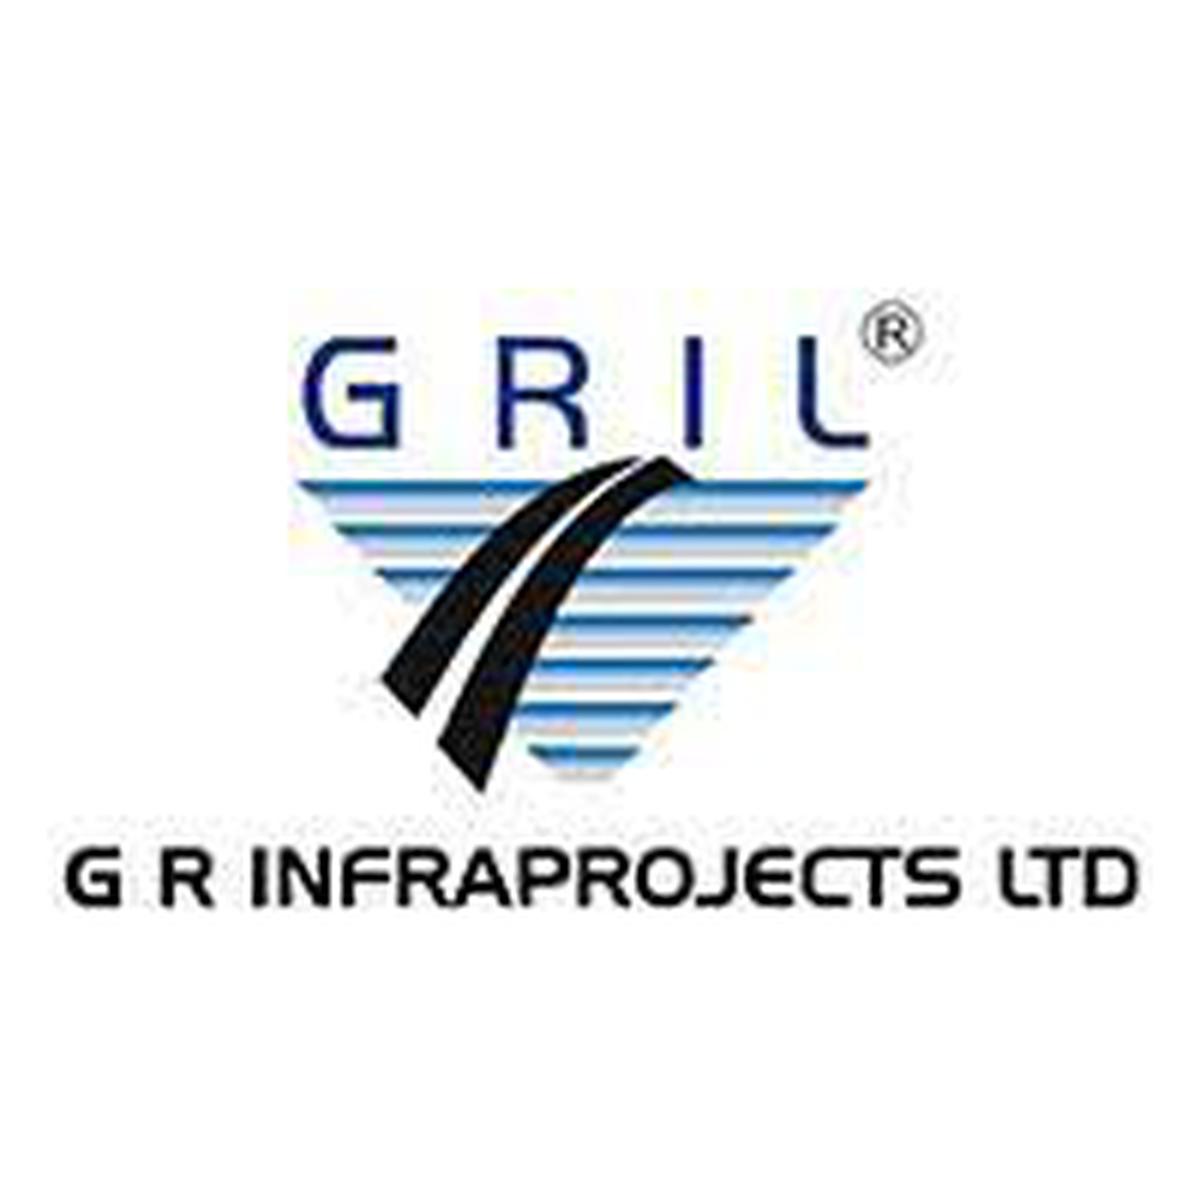 GR Infraprojects shares